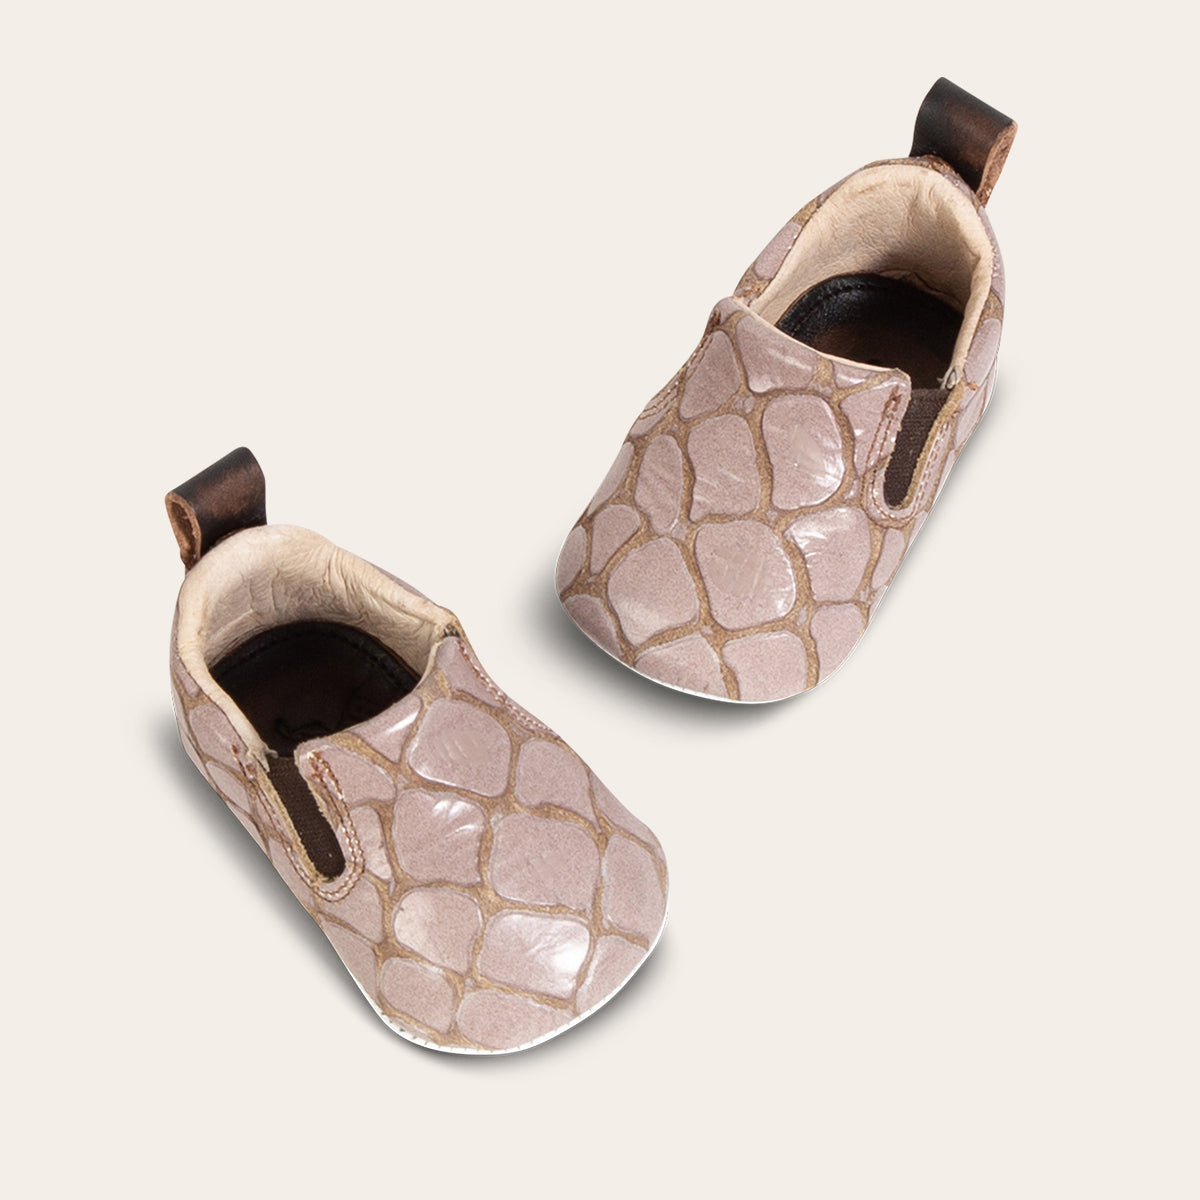 top view showing heel pull tab and side elastic panel on FREEBIRD infant baby kicks stone croco leather shoe